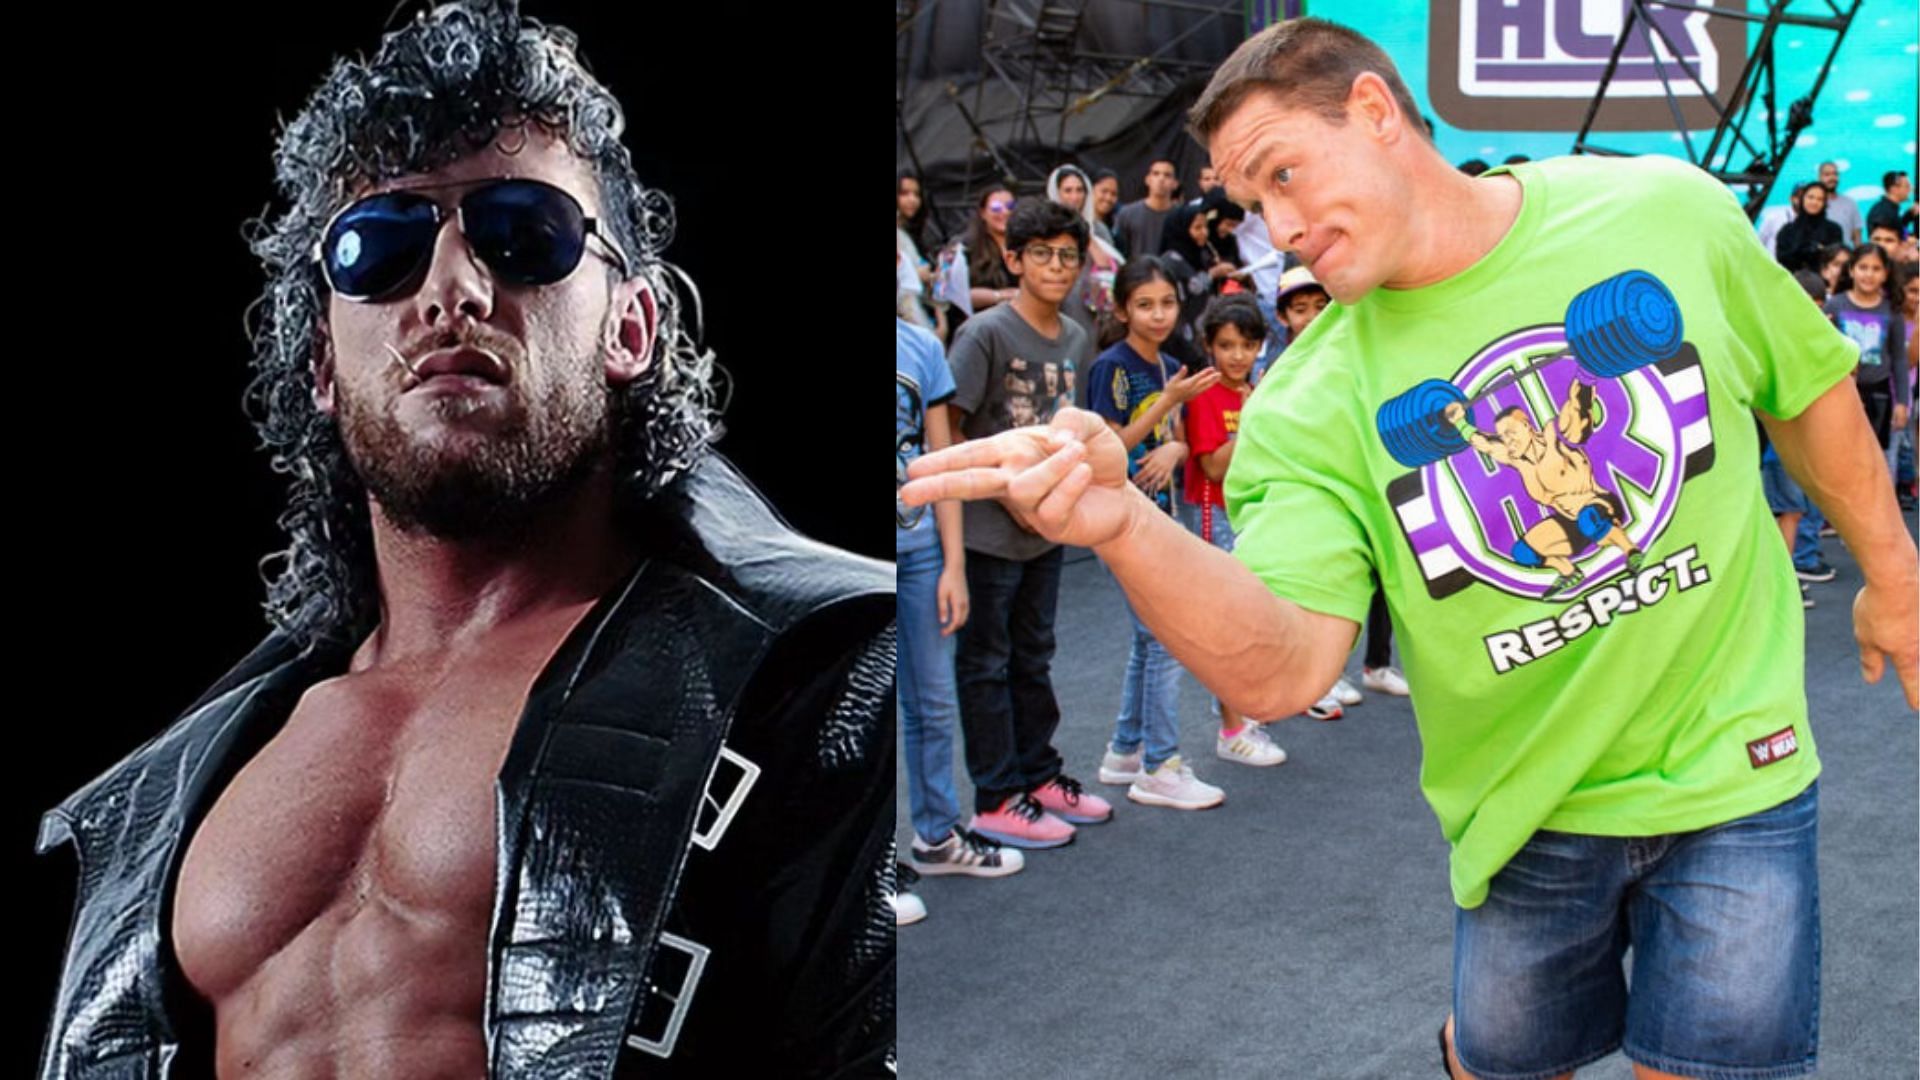 Kenny Omega and John Cena are top names in AEW and WWE respectively [Image Credits: Omega